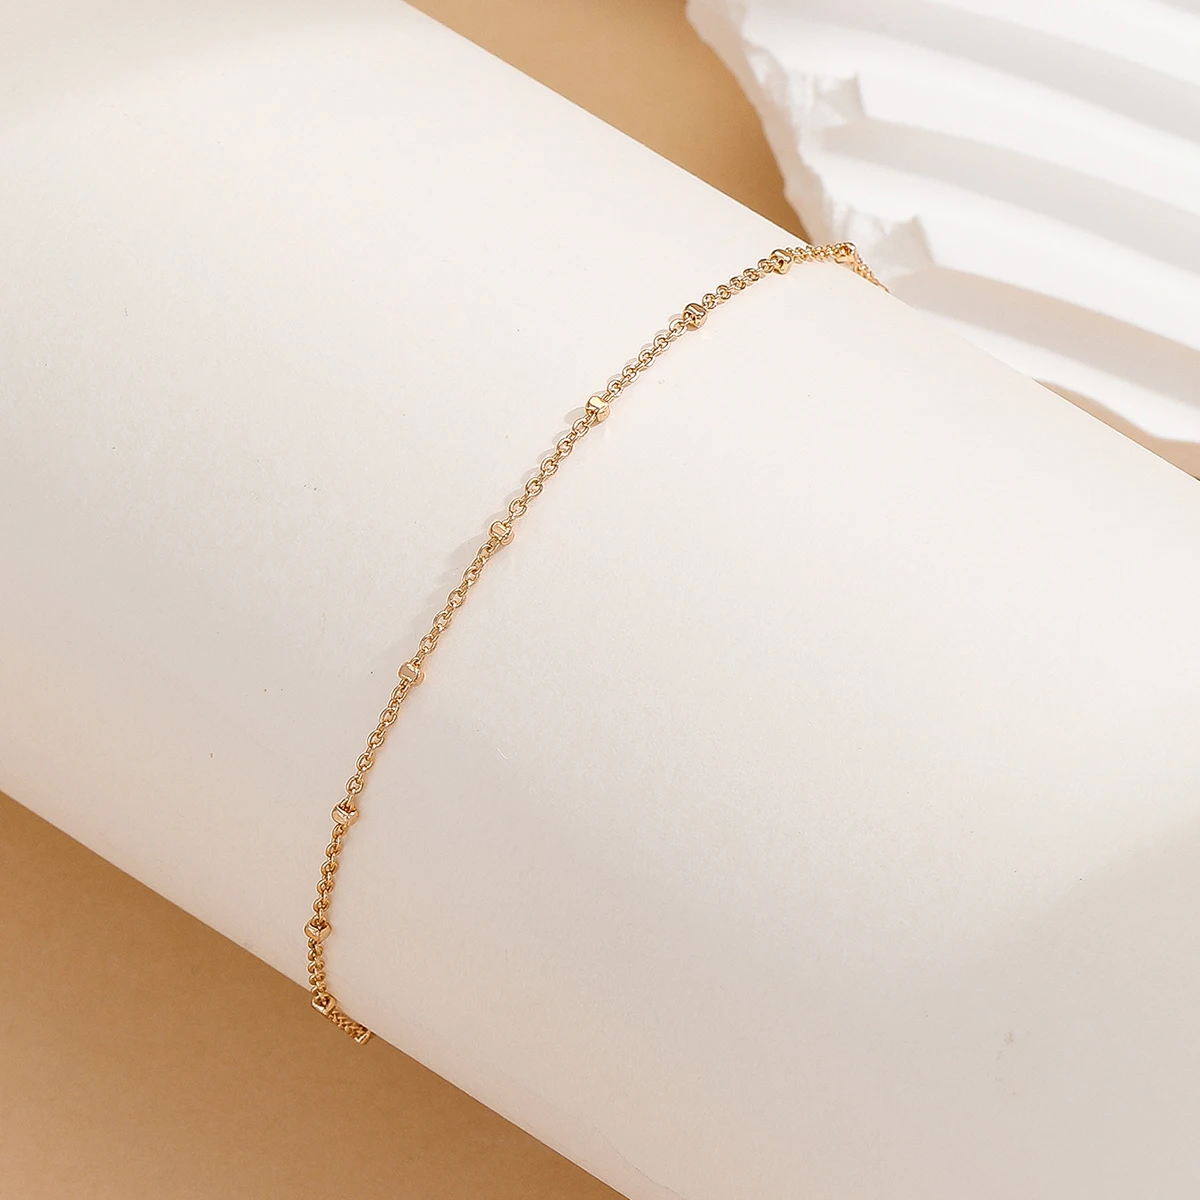 Kinitial Exquisite and fashionable laser plated anklet, a beautiful special style anklet for her anniversary gift